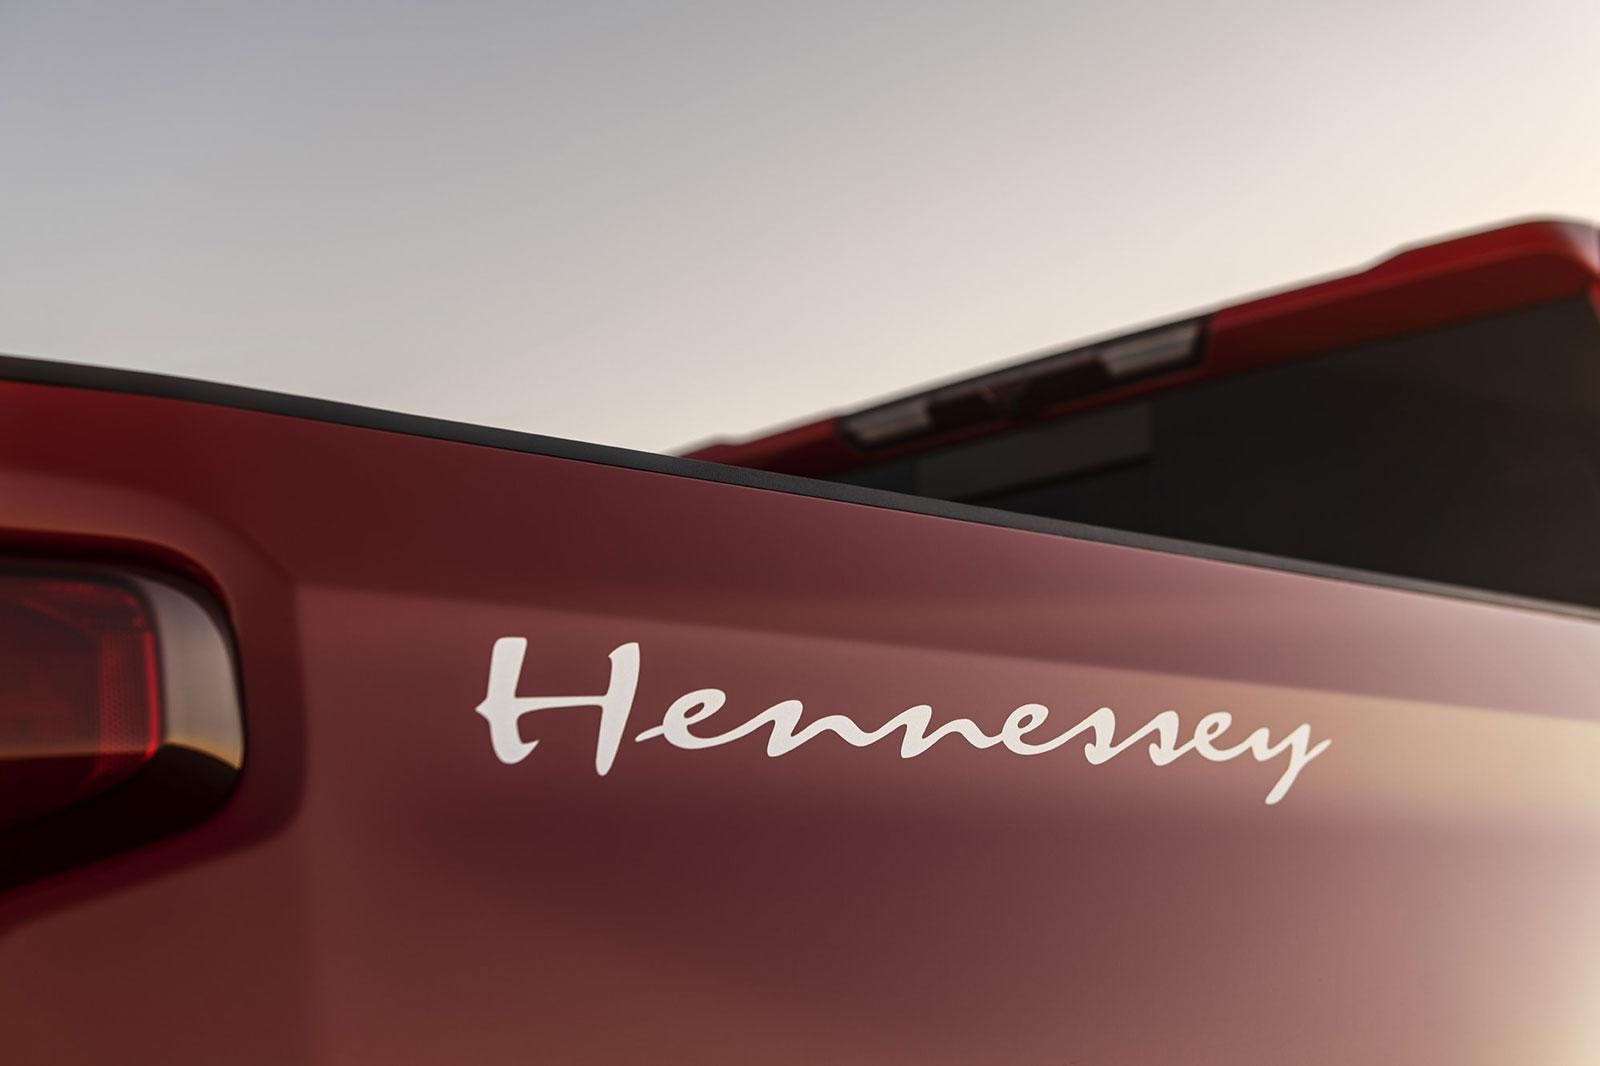 White Hennessey graphic on rear exterior of a supercharged red Chevy Silverado